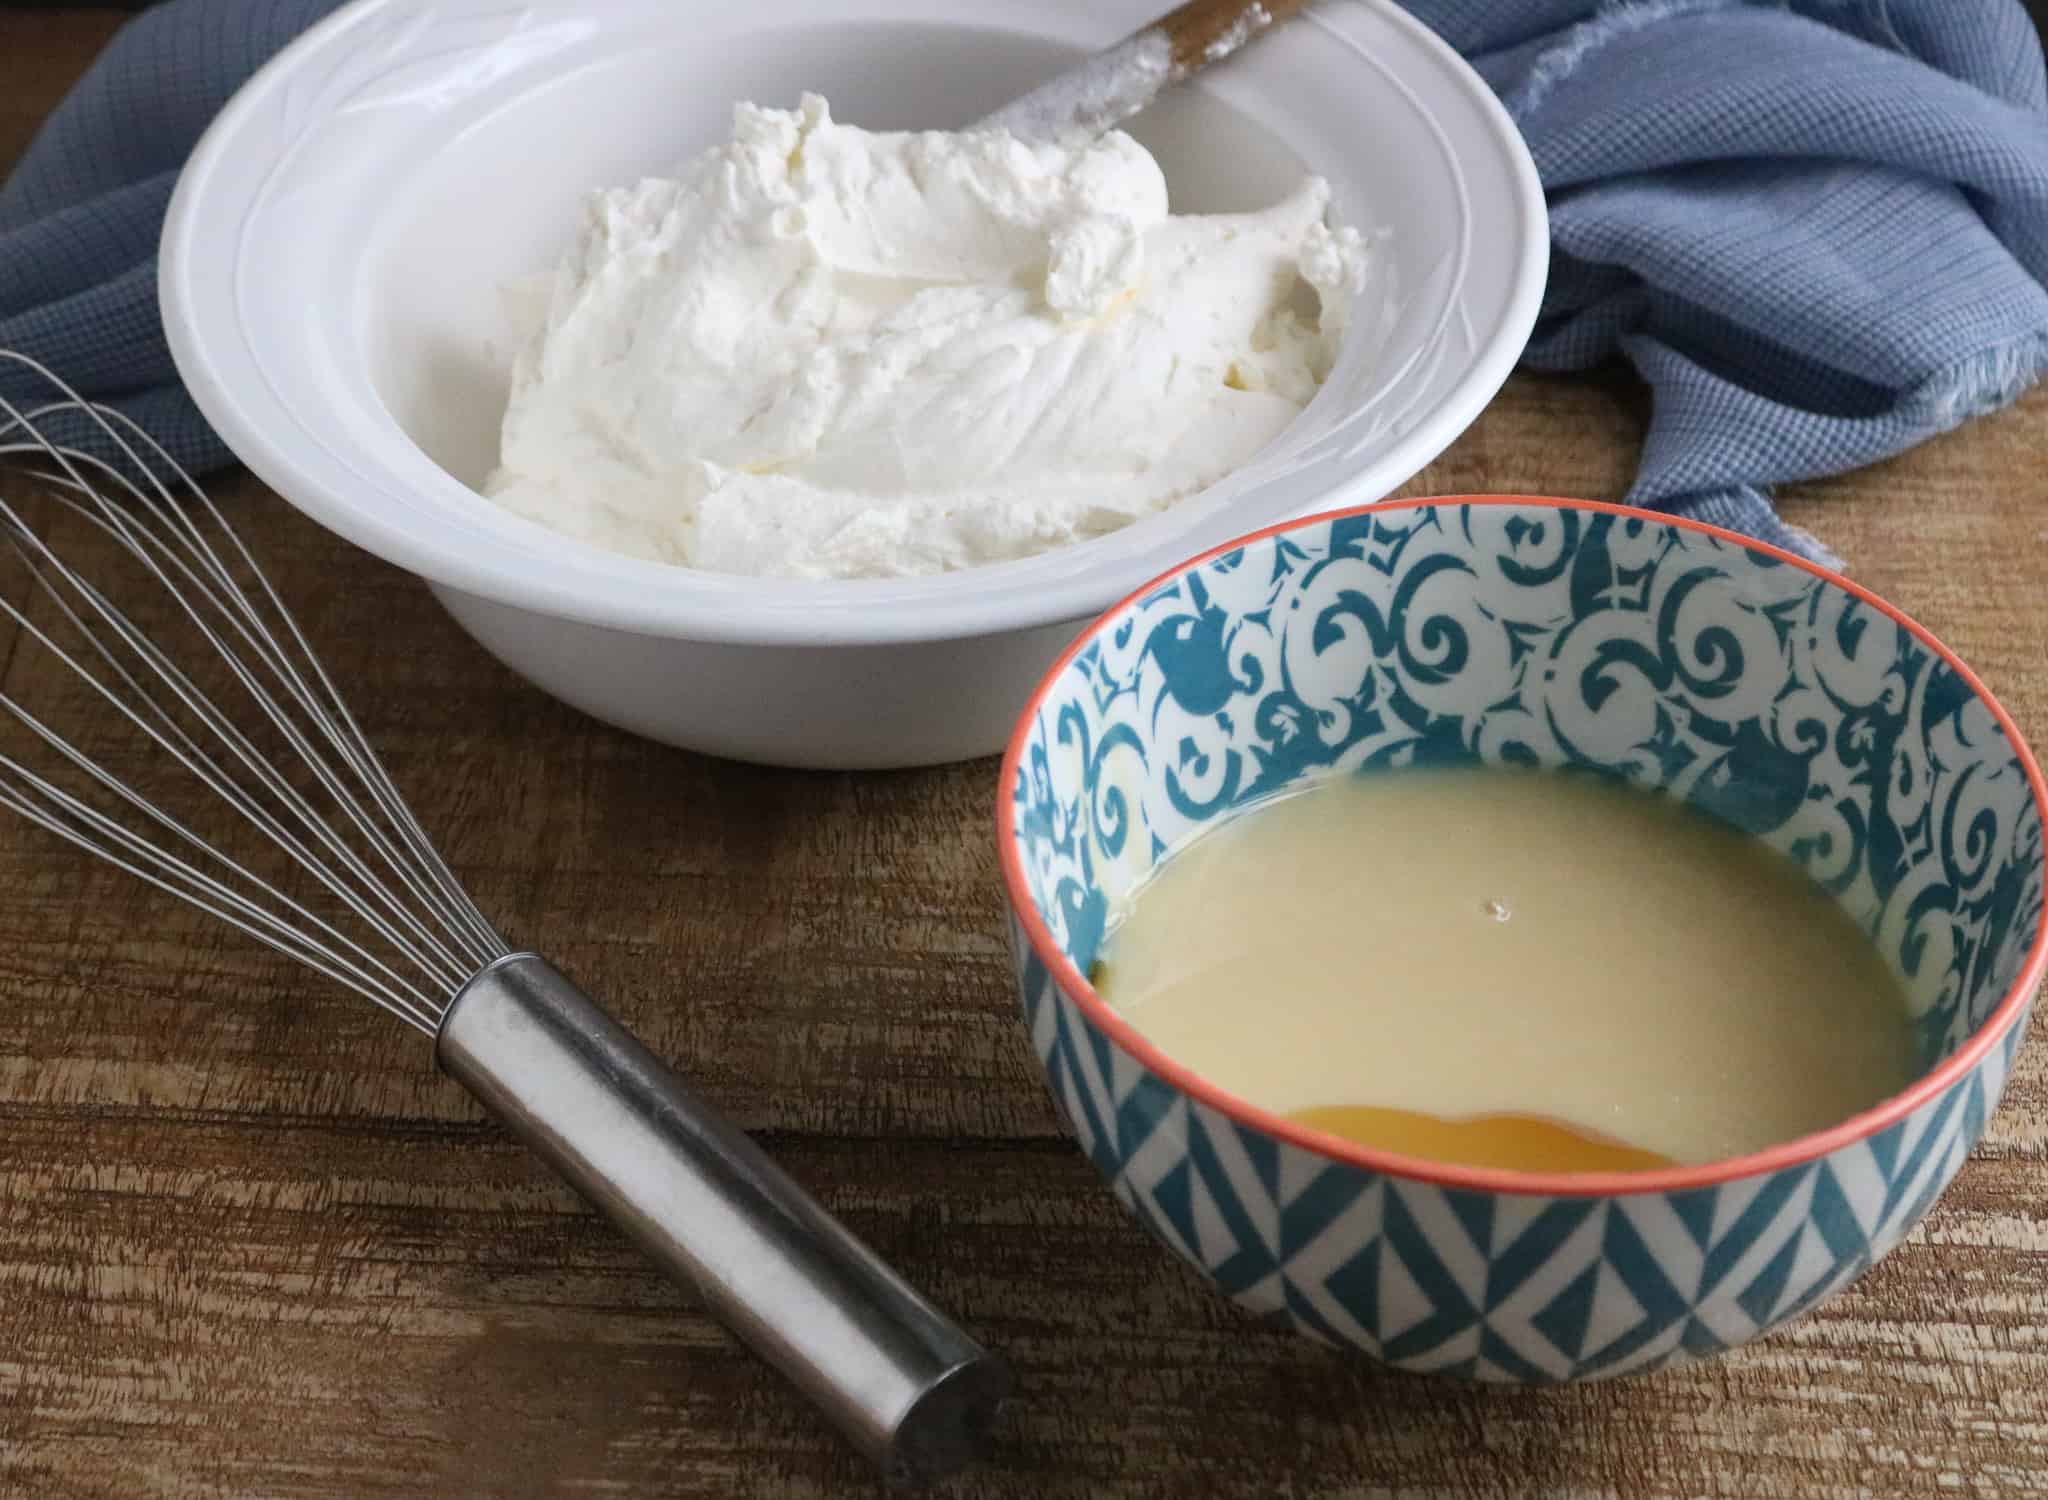 Thick heavy whipping cream in a white bowl and sweetened condensed milk in a teal patterned bowl on a wood table next to a silver whisk and blue kitchen towel